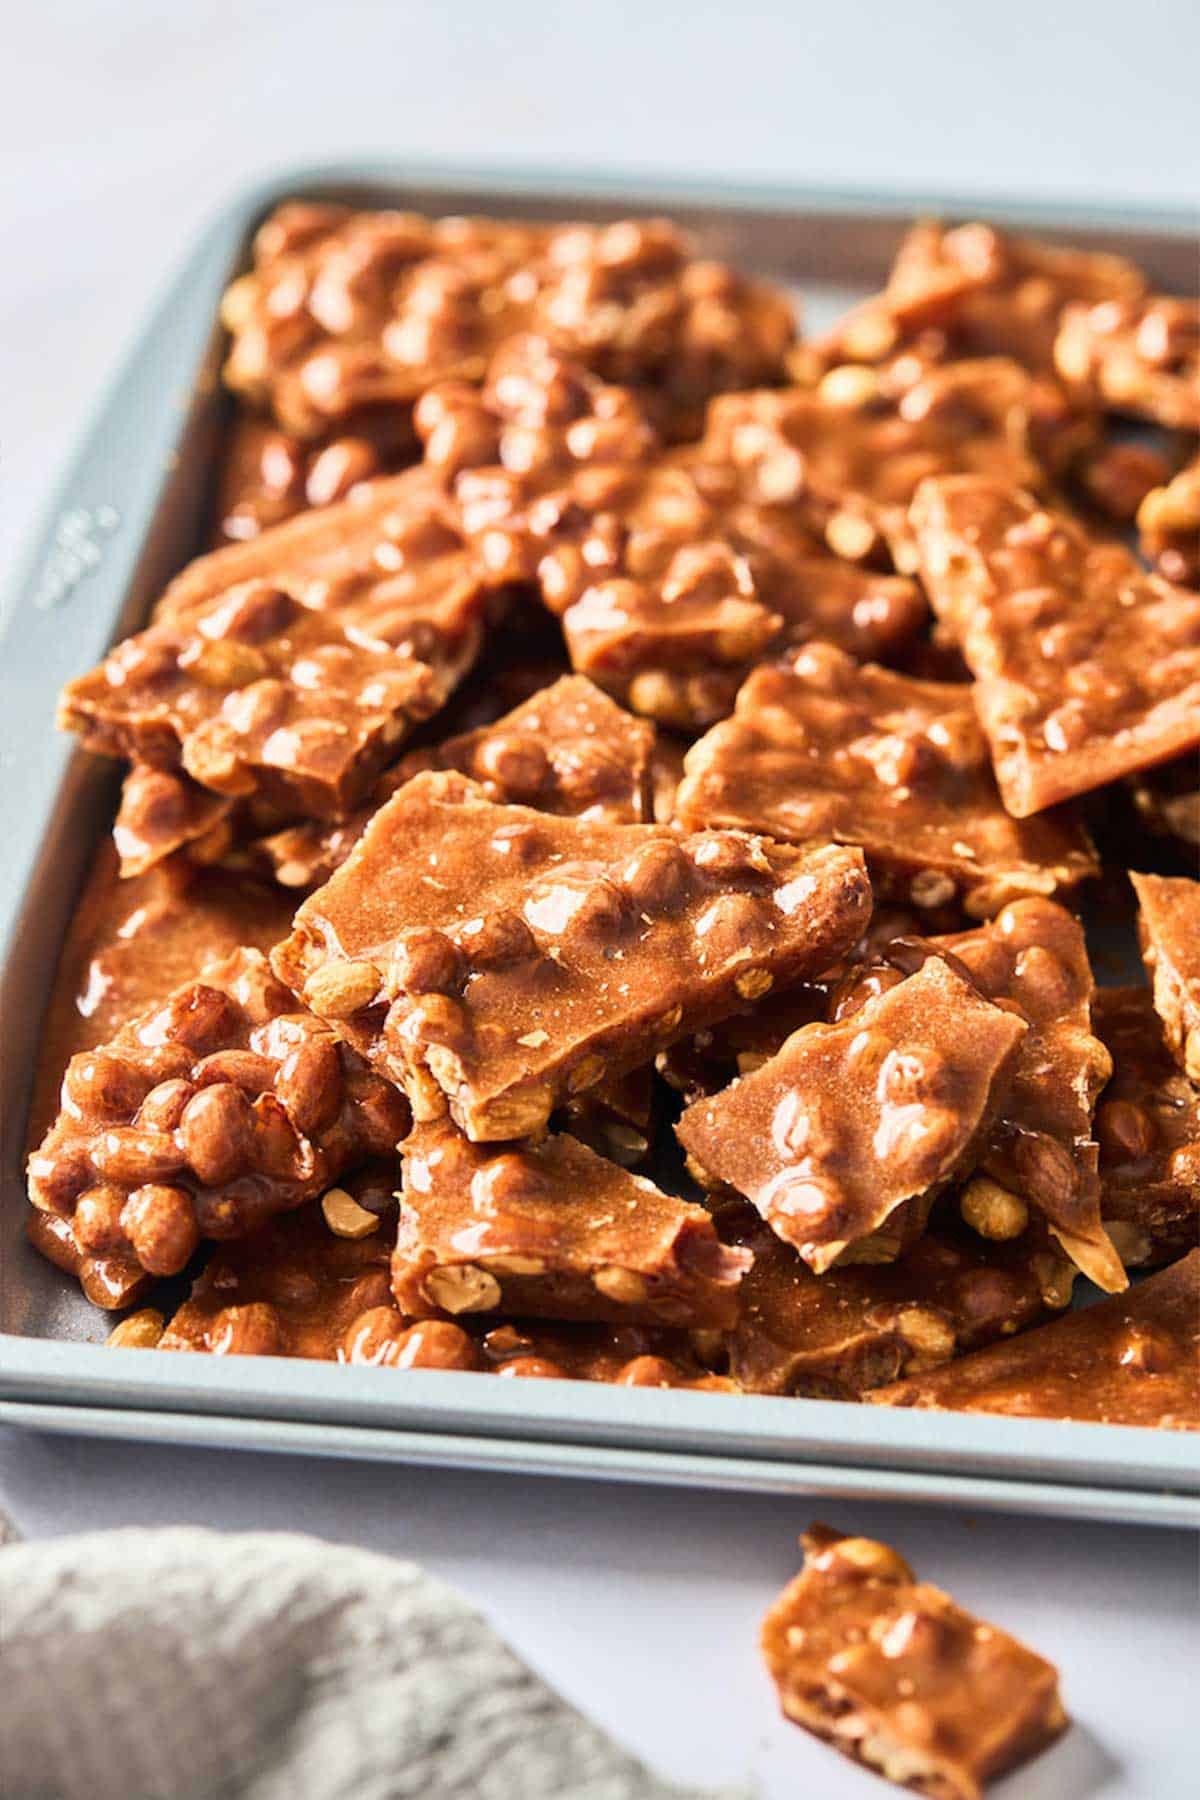 A close up of the best peanut brittle on a baking sheet after being broken apart.